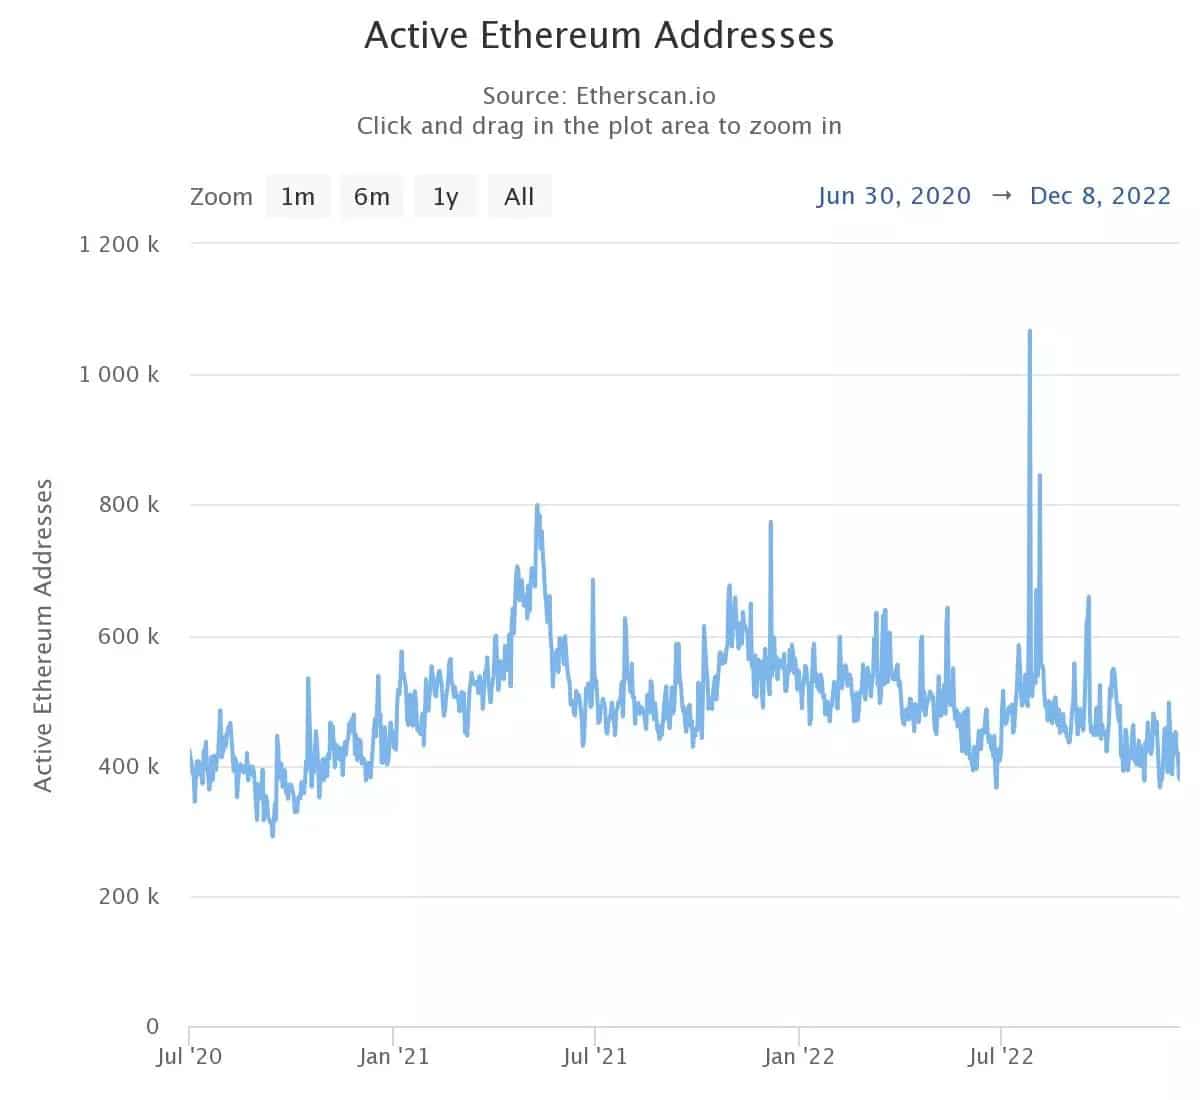 Figure 3 - Number of daily active addresses on the Ethereum blockchain